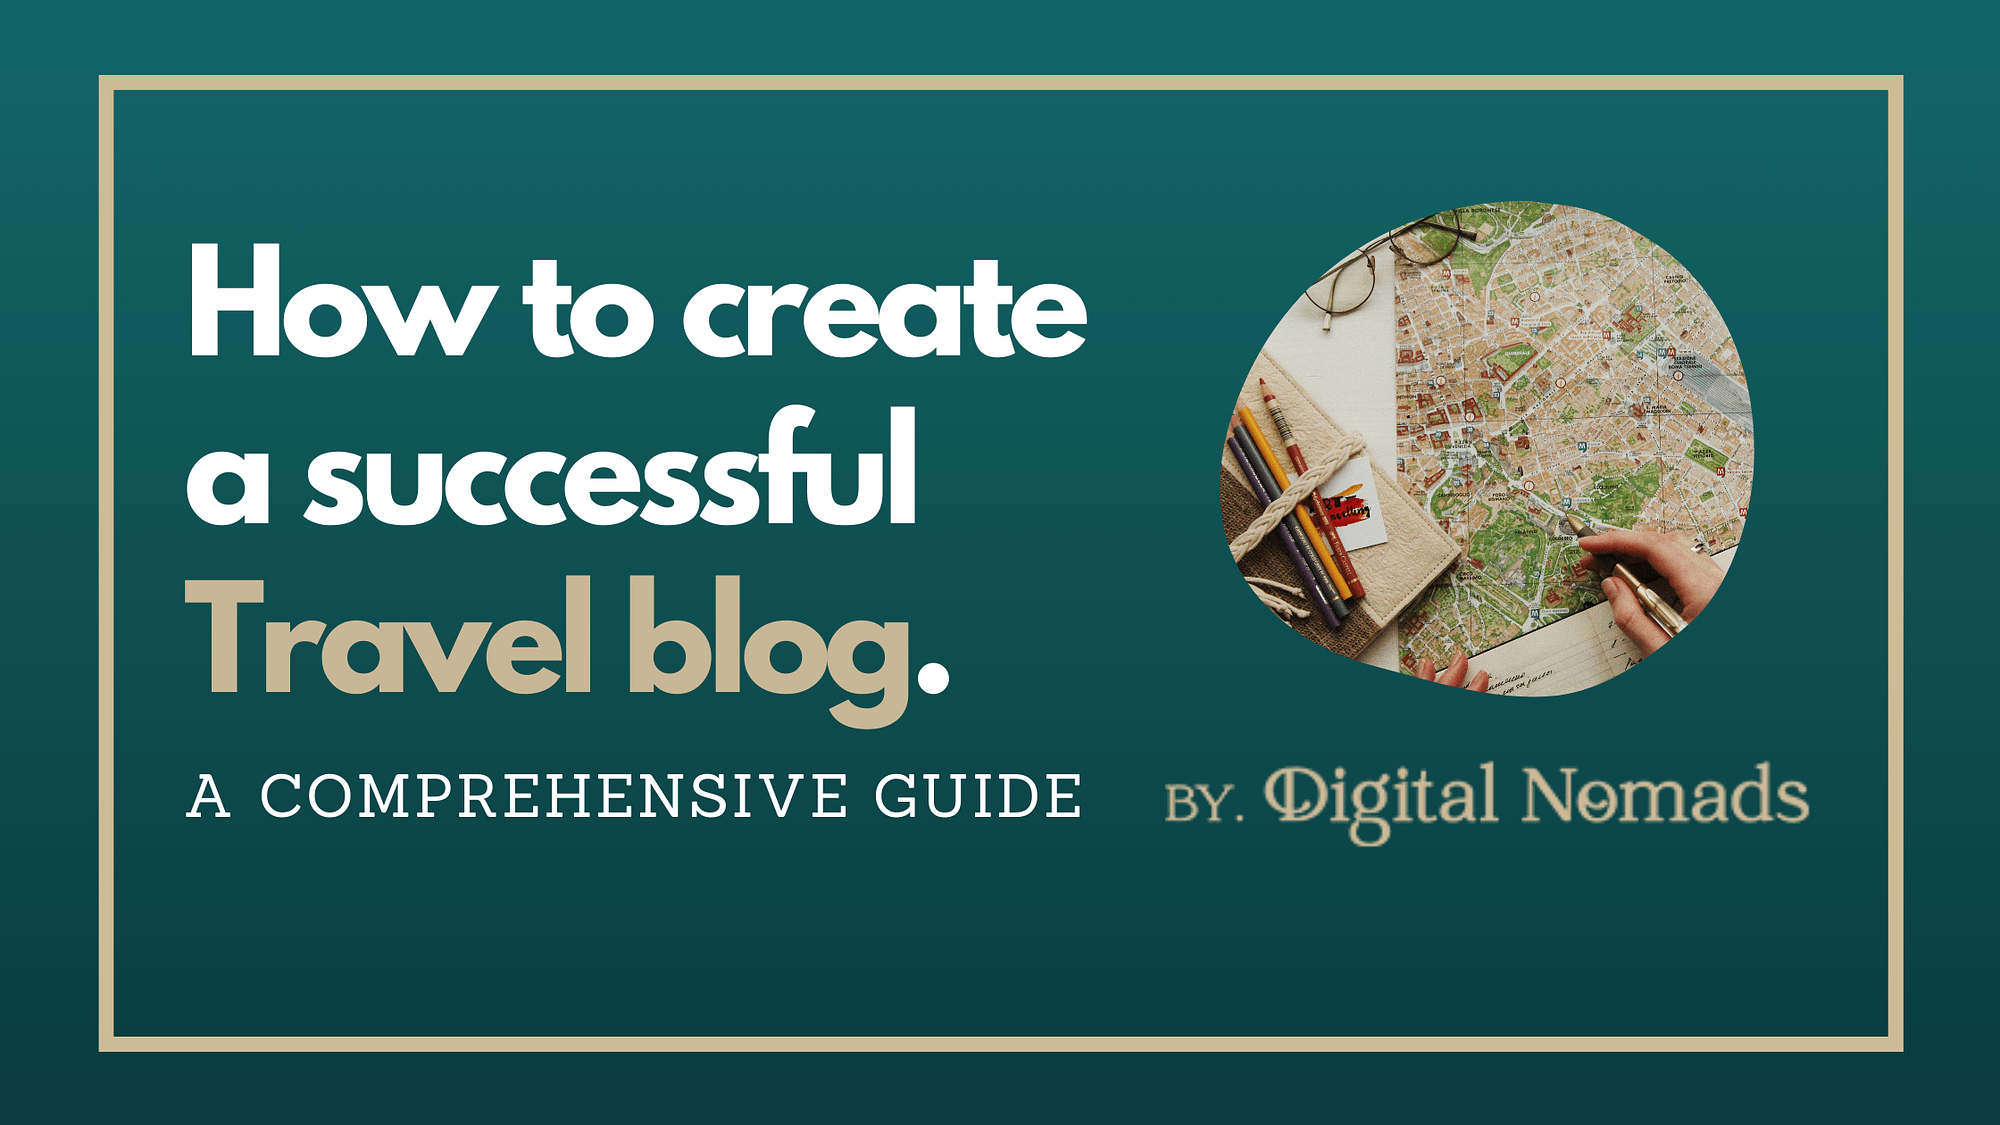 How to create a successful travel blog - Guide by digital nomads